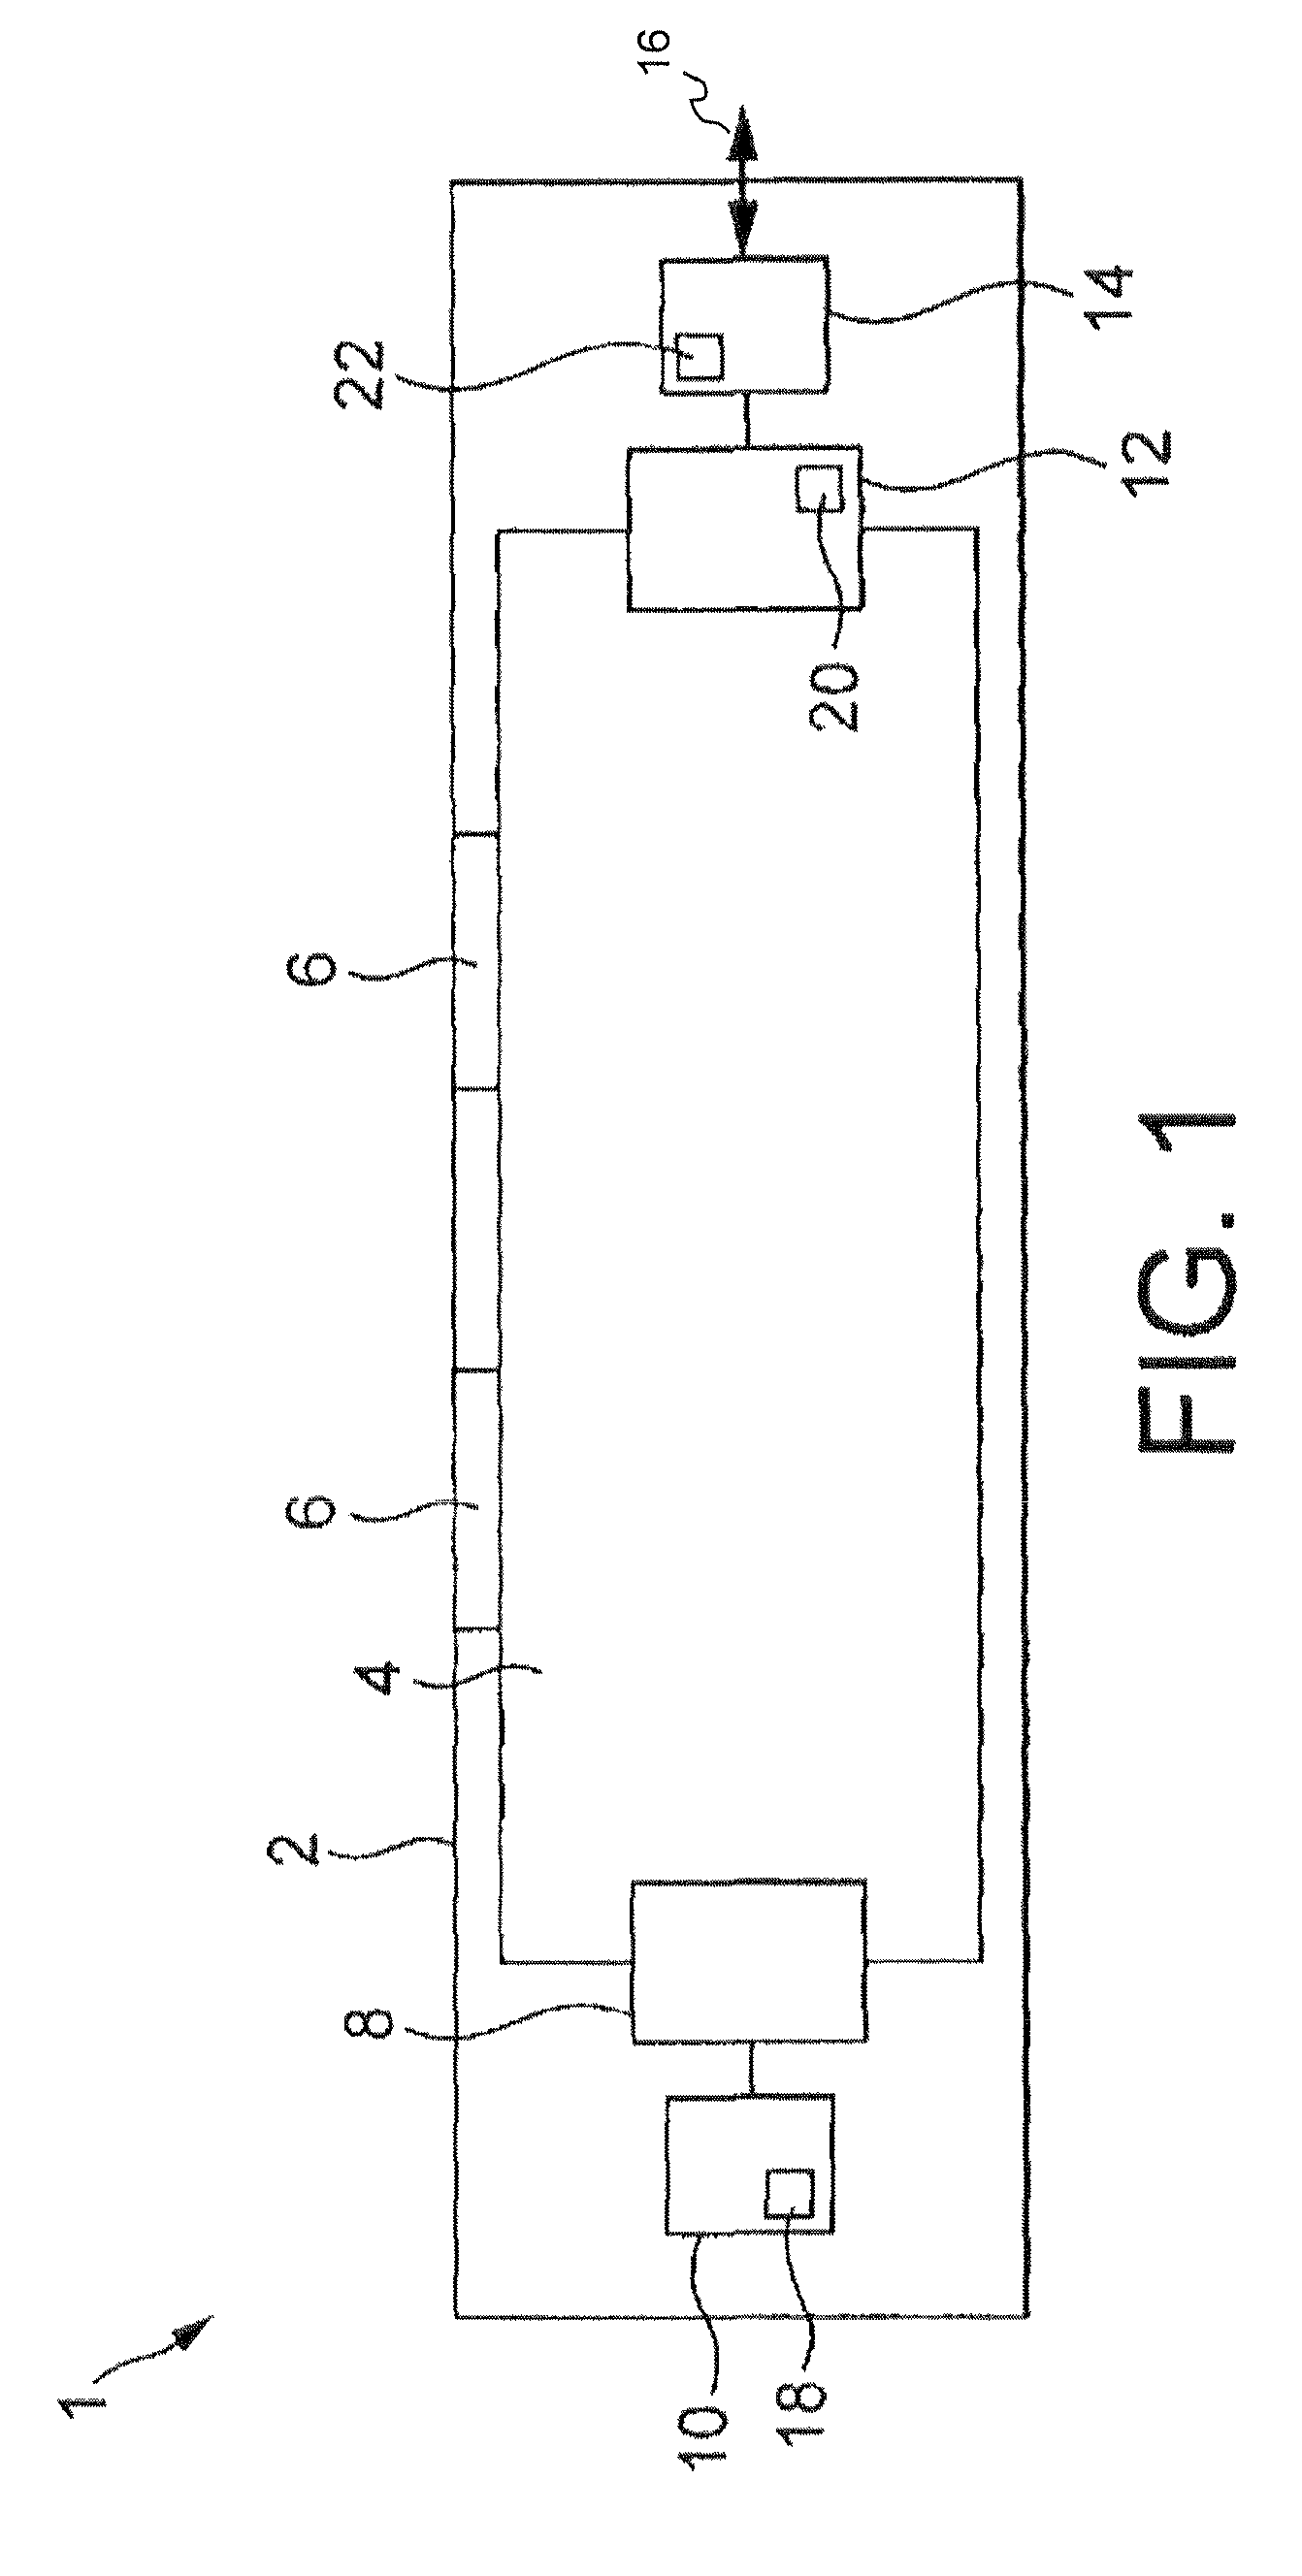 Temperature calibration methods and apparatus for optical absorption gas sensors, and optical absorption gas sensors thereby calibrated